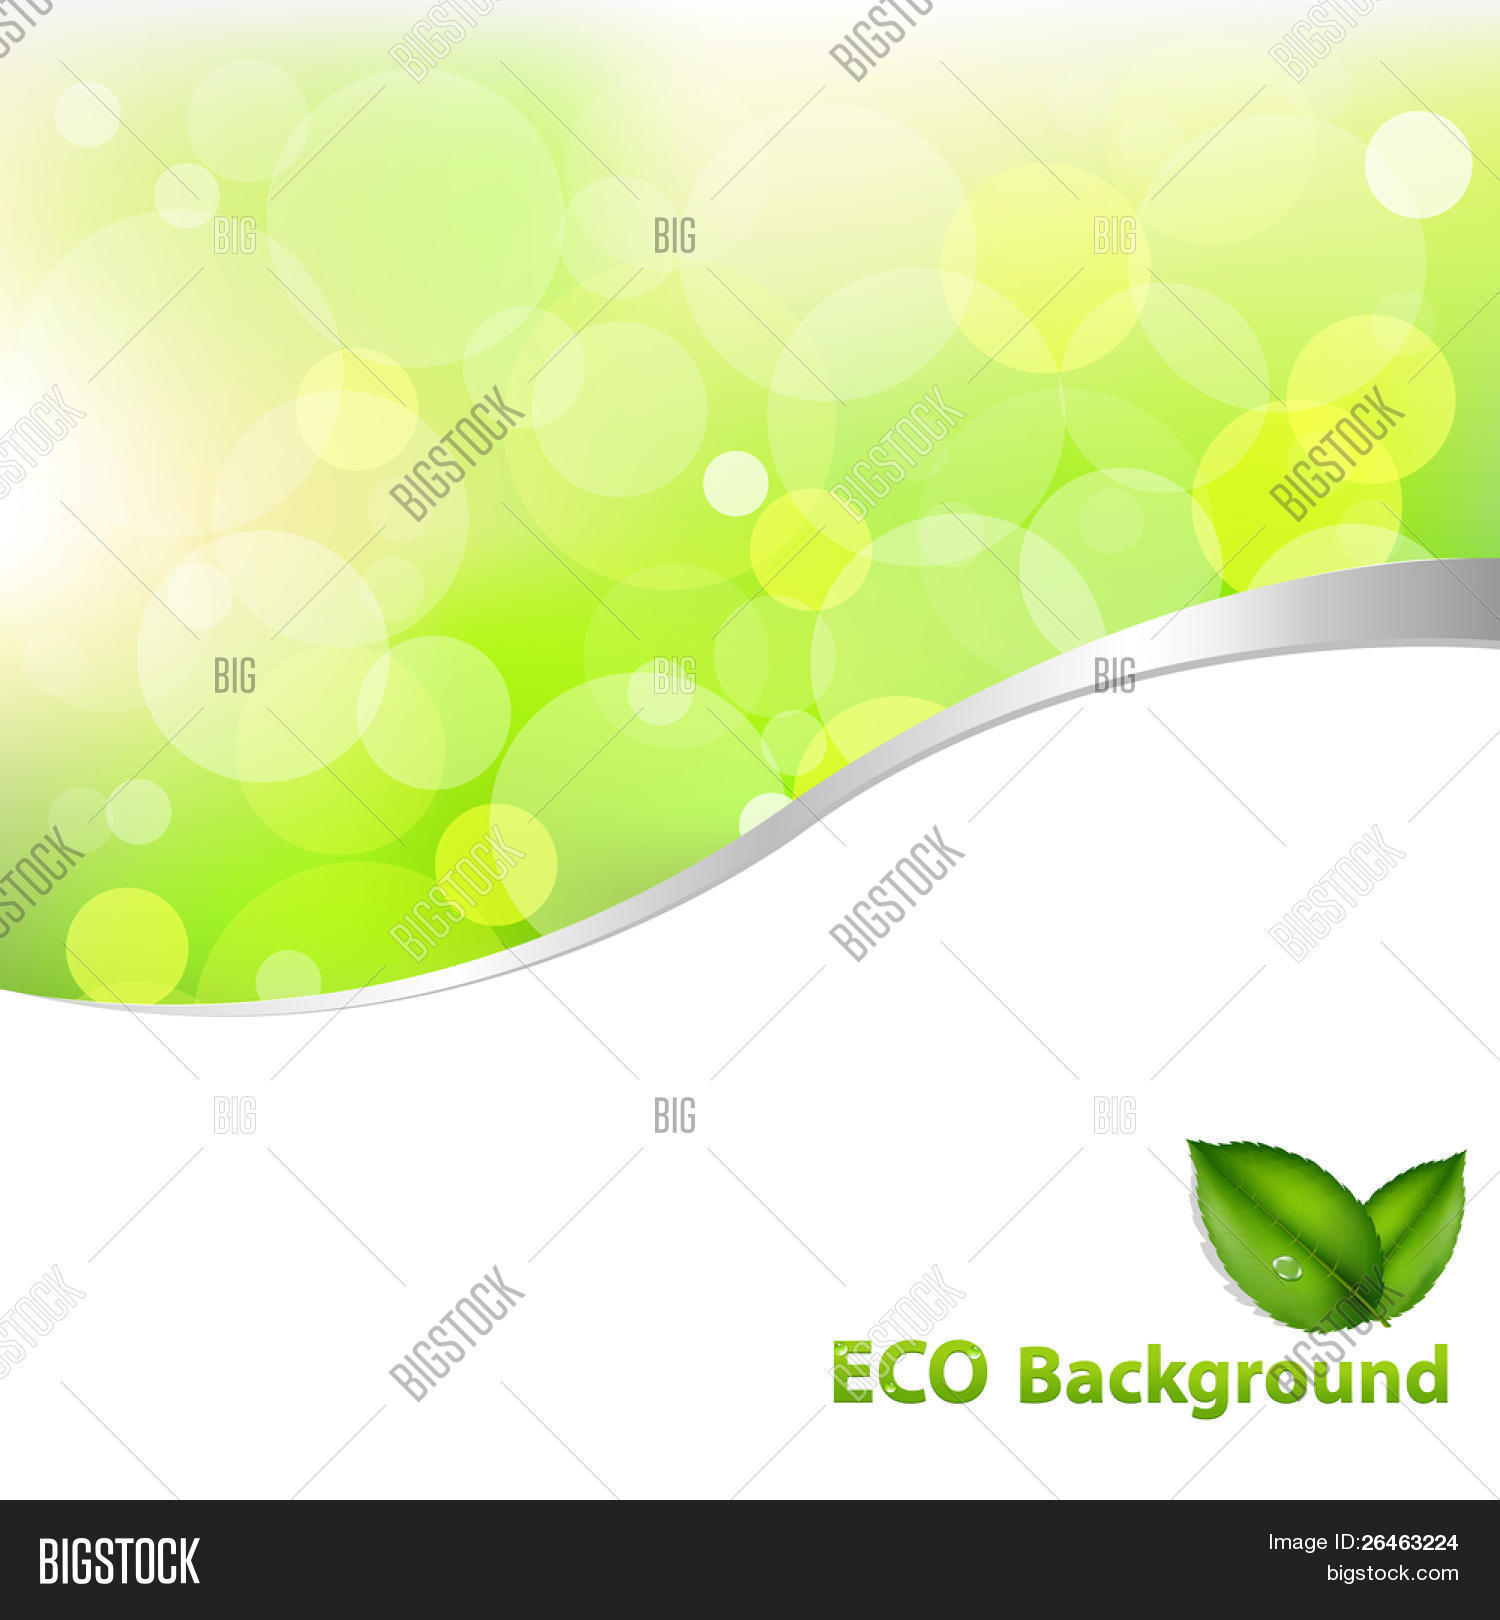 Green Eco Background Vector & Photo (Free Trial) | Bigstock